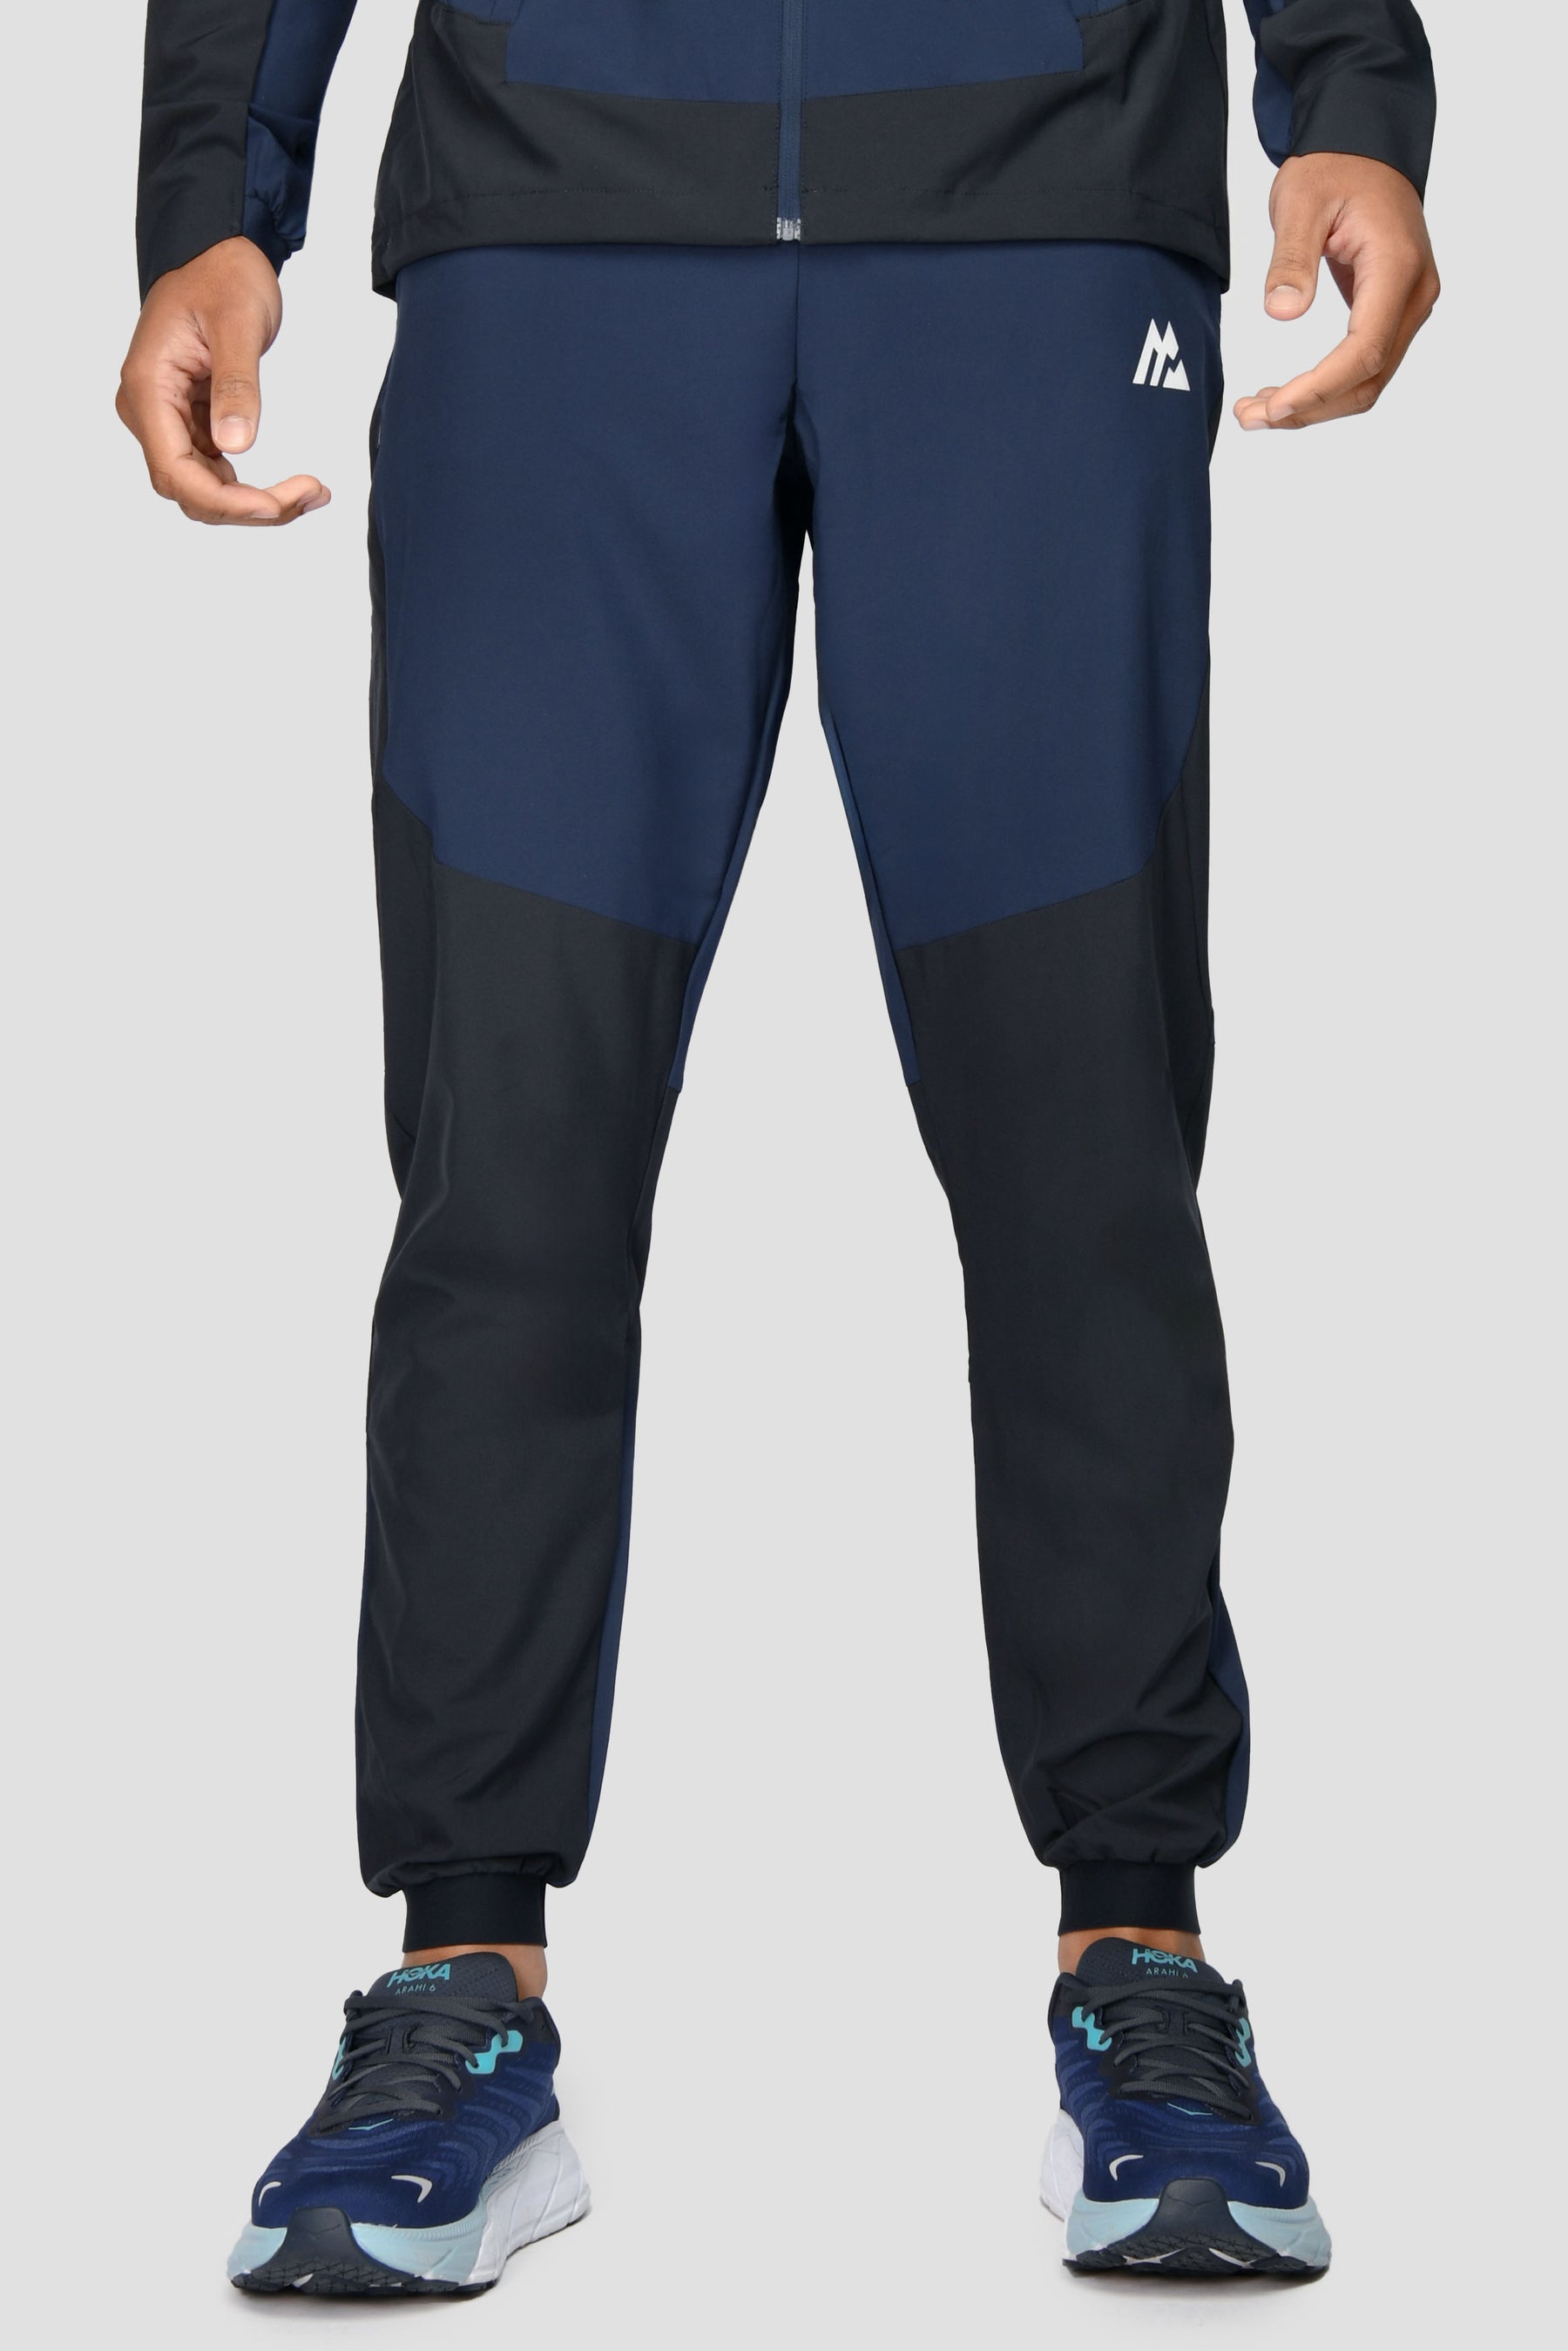 Shift 2.0 Pant - Space Blue/Midnight Blue